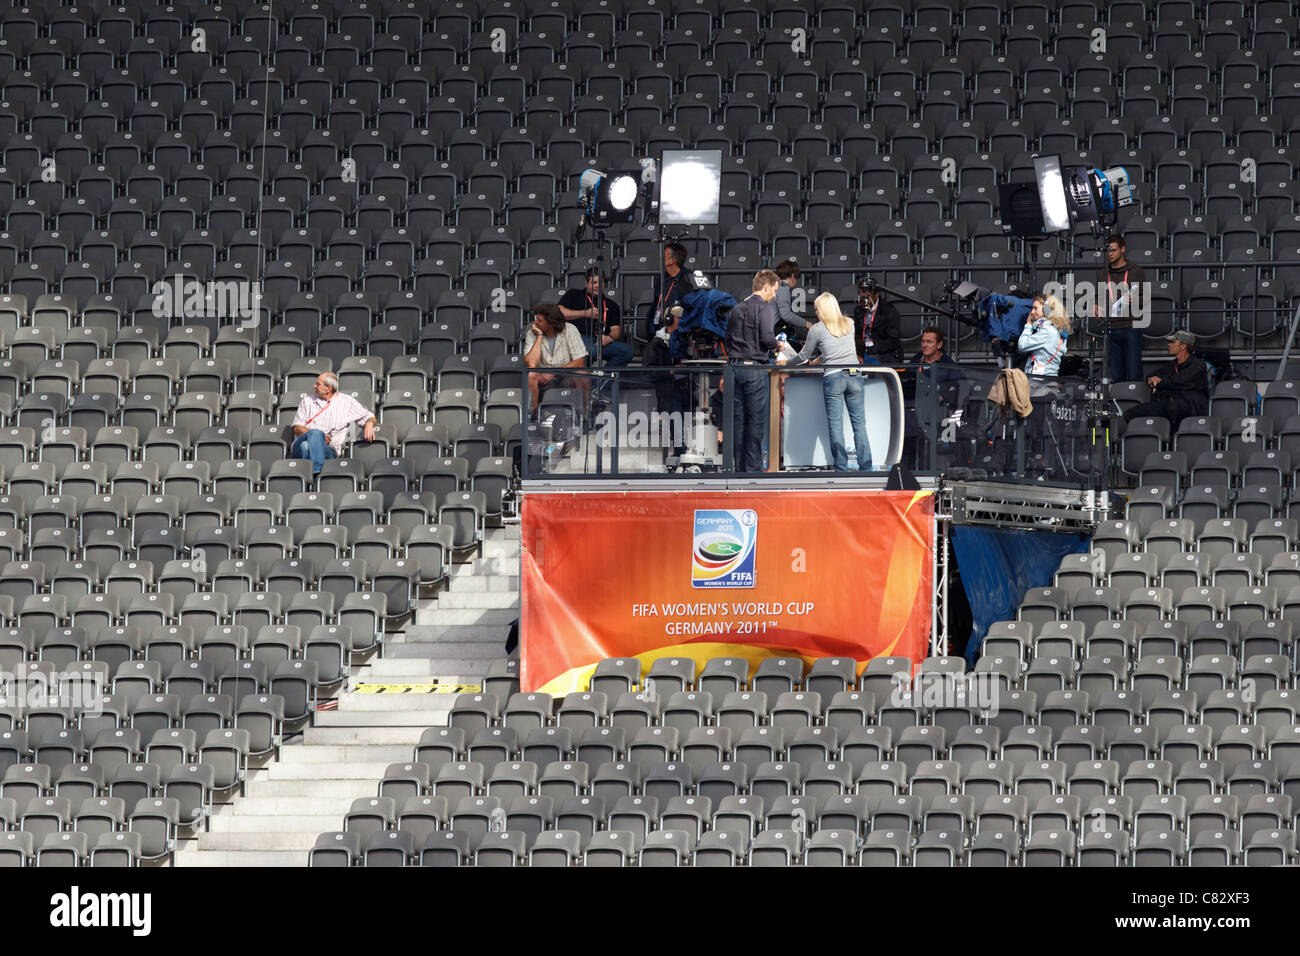 Broadcast media preparations at Olympic Stadium in Berlin, Germany on the eve of the 2011 Women's World Cup soccer tournament. Stock Photo